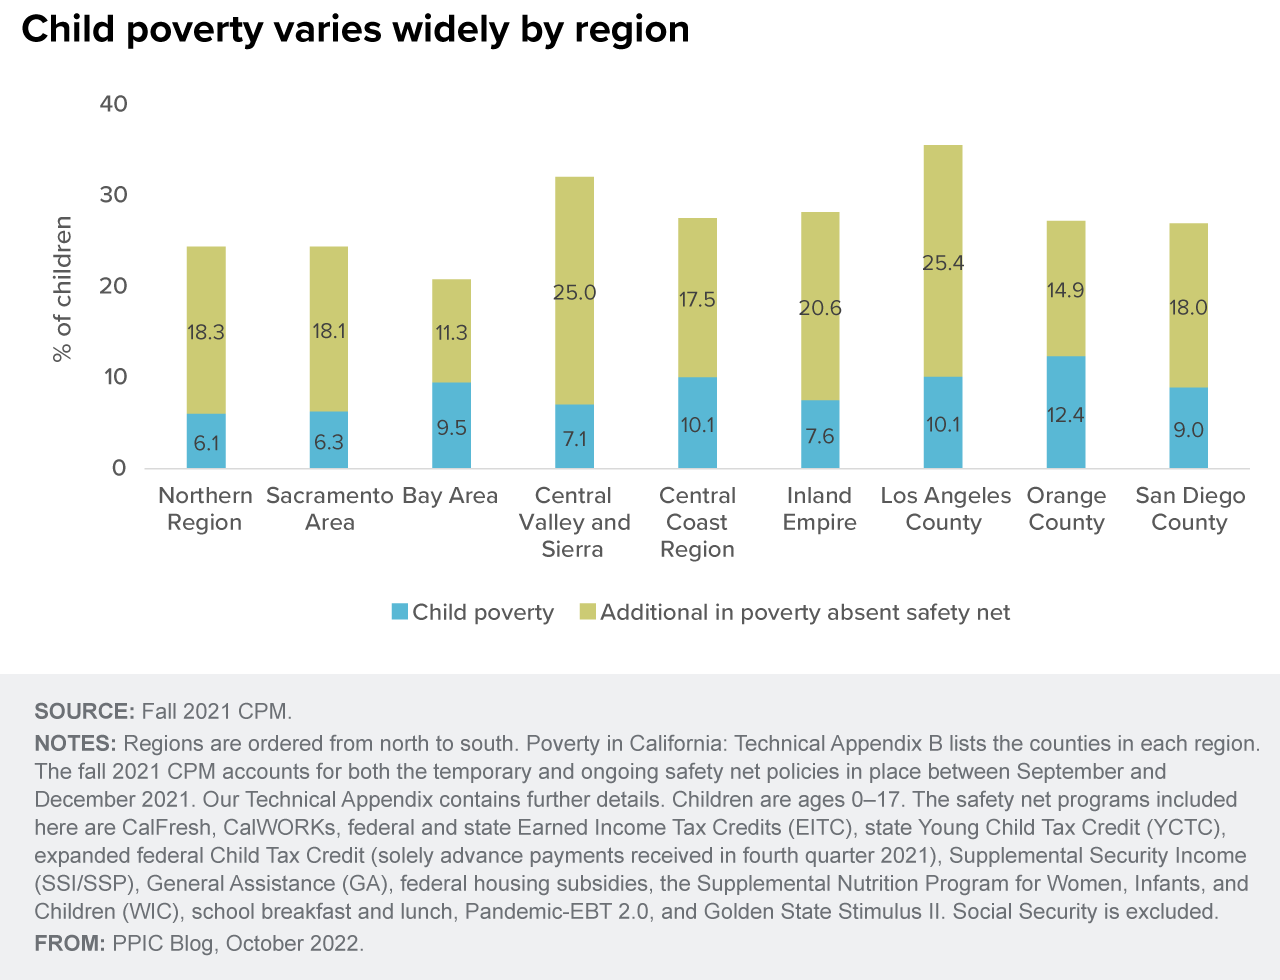 figure - Child poverty varies widely by region